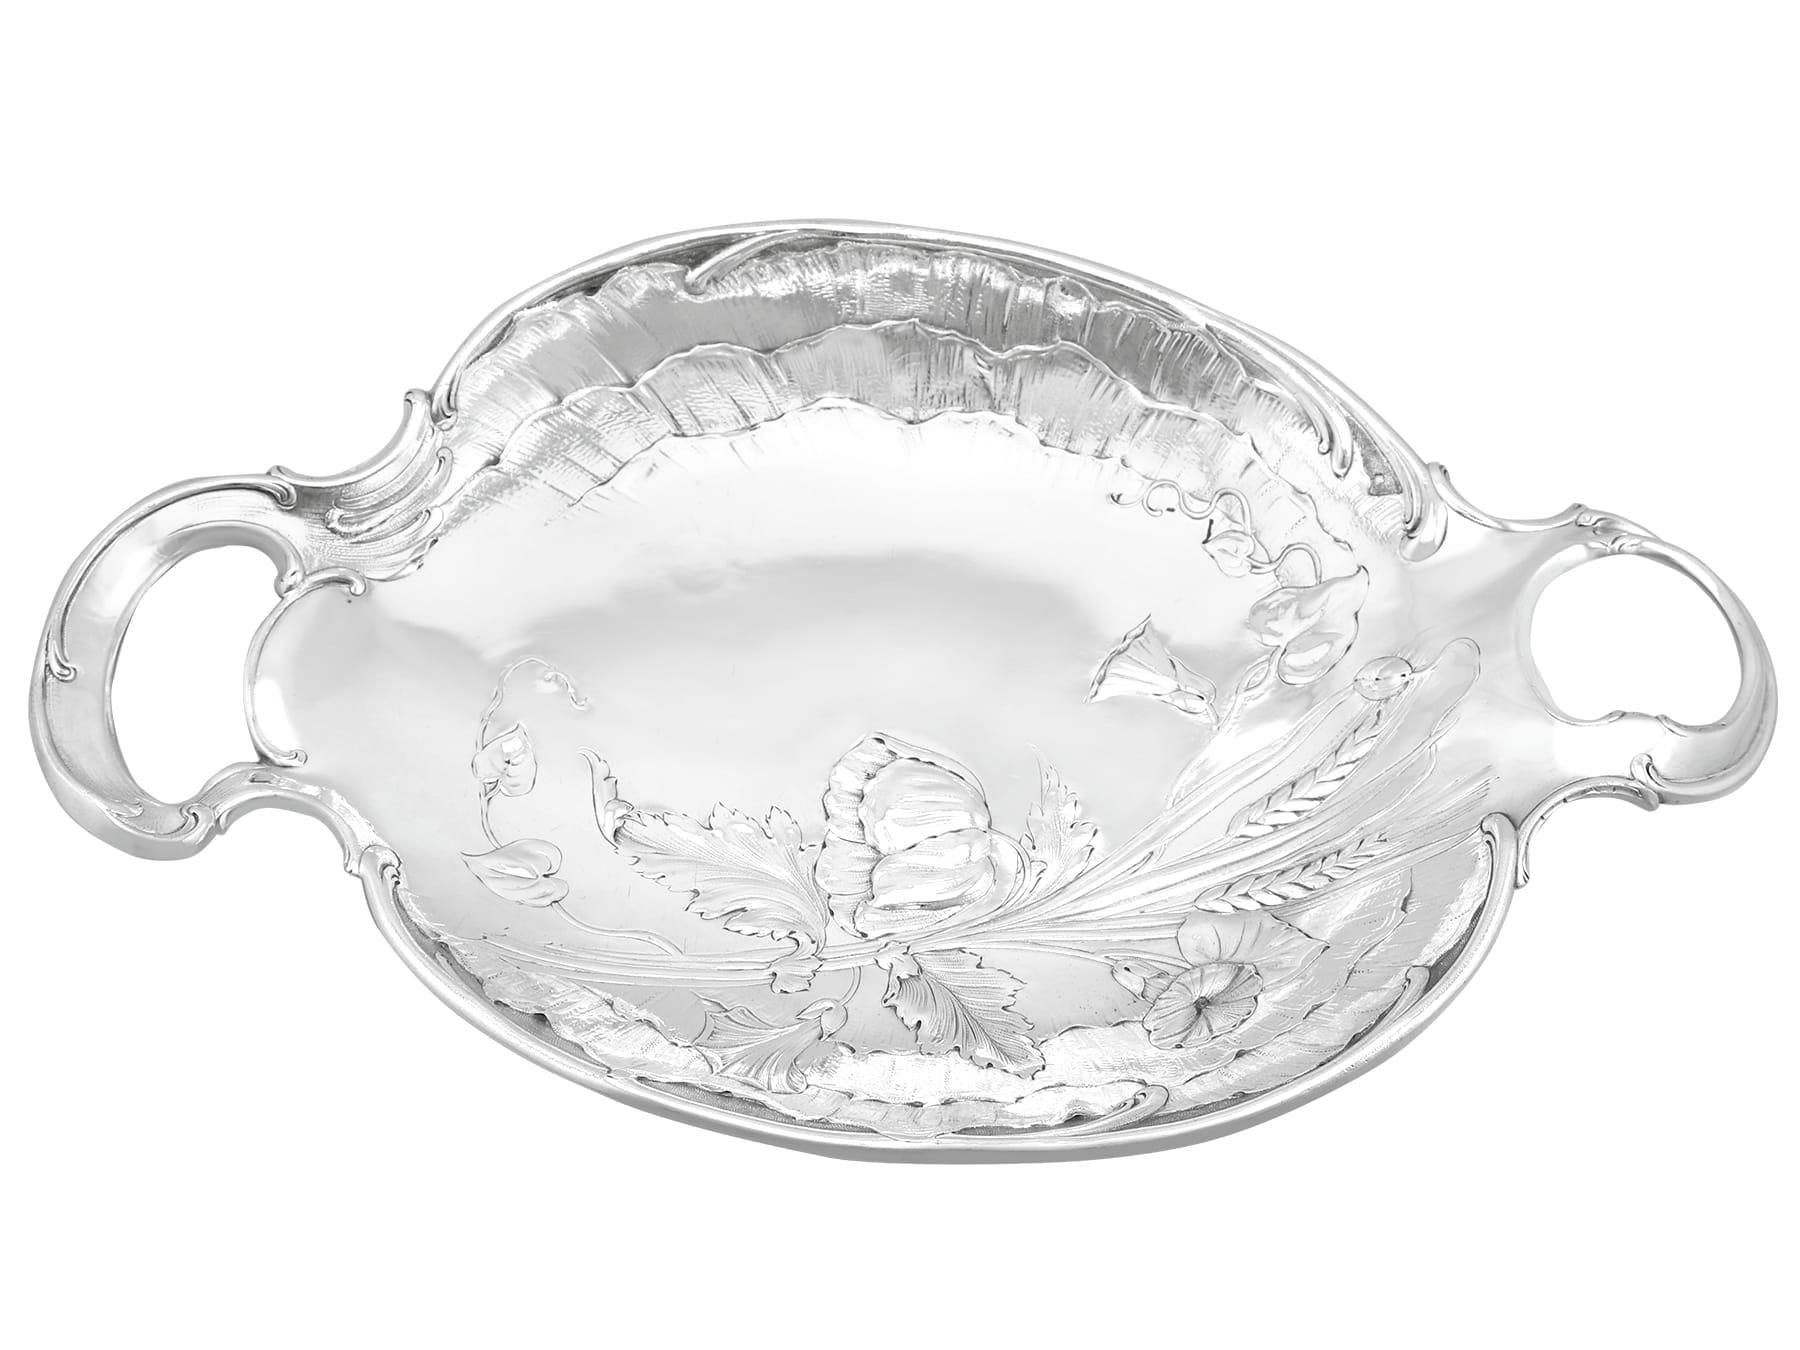 An exceptional, fine and impressive pair of antique Austro-Hungarian silver fruit dishes; an addition to our silver tableware collection.

These exceptional antique Austro-Hungarian silver fruit dishes, have an oval-shaped form.

The surfaces of